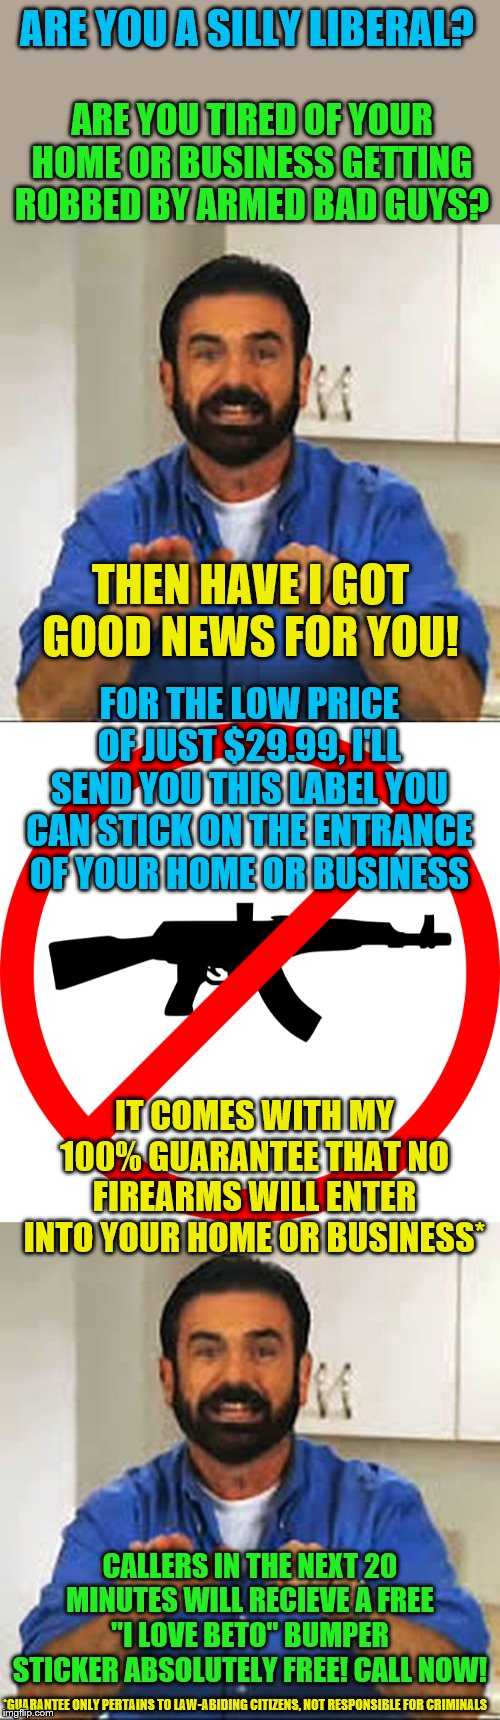 That number is 1800IMGFLIP(not a real number)! Call now! | ARE YOU A SILLY LIBERAL? ARE YOU TIRED OF YOUR HOME OR BUSINESS GETTING ROBBED BY ARMED BAD GUYS? THEN HAVE I GOT GOOD NEWS FOR YOU! FOR THE LOW PRICE OF JUST $29.99, I'LL SEND YOU THIS LABEL YOU CAN STICK ON THE ENTRANCE OF YOUR HOME OR BUSINESS; IT COMES WITH MY 100% GUARANTEE THAT NO FIREARMS WILL ENTER INTO YOUR HOME OR BUSINESS*; CALLERS IN THE NEXT 20 MINUTES WILL RECIEVE A FREE "I LOVE BETO" BUMPER STICKER ABSOLUTELY FREE! CALL NOW! *GUARANTEE ONLY PERTAINS TO LAW-ABIDING CITIZENS, NOT RESPONSIBLE FOR CRIMINALS | image tagged in but wait there's more,no guns,memes,political meme | made w/ Imgflip meme maker